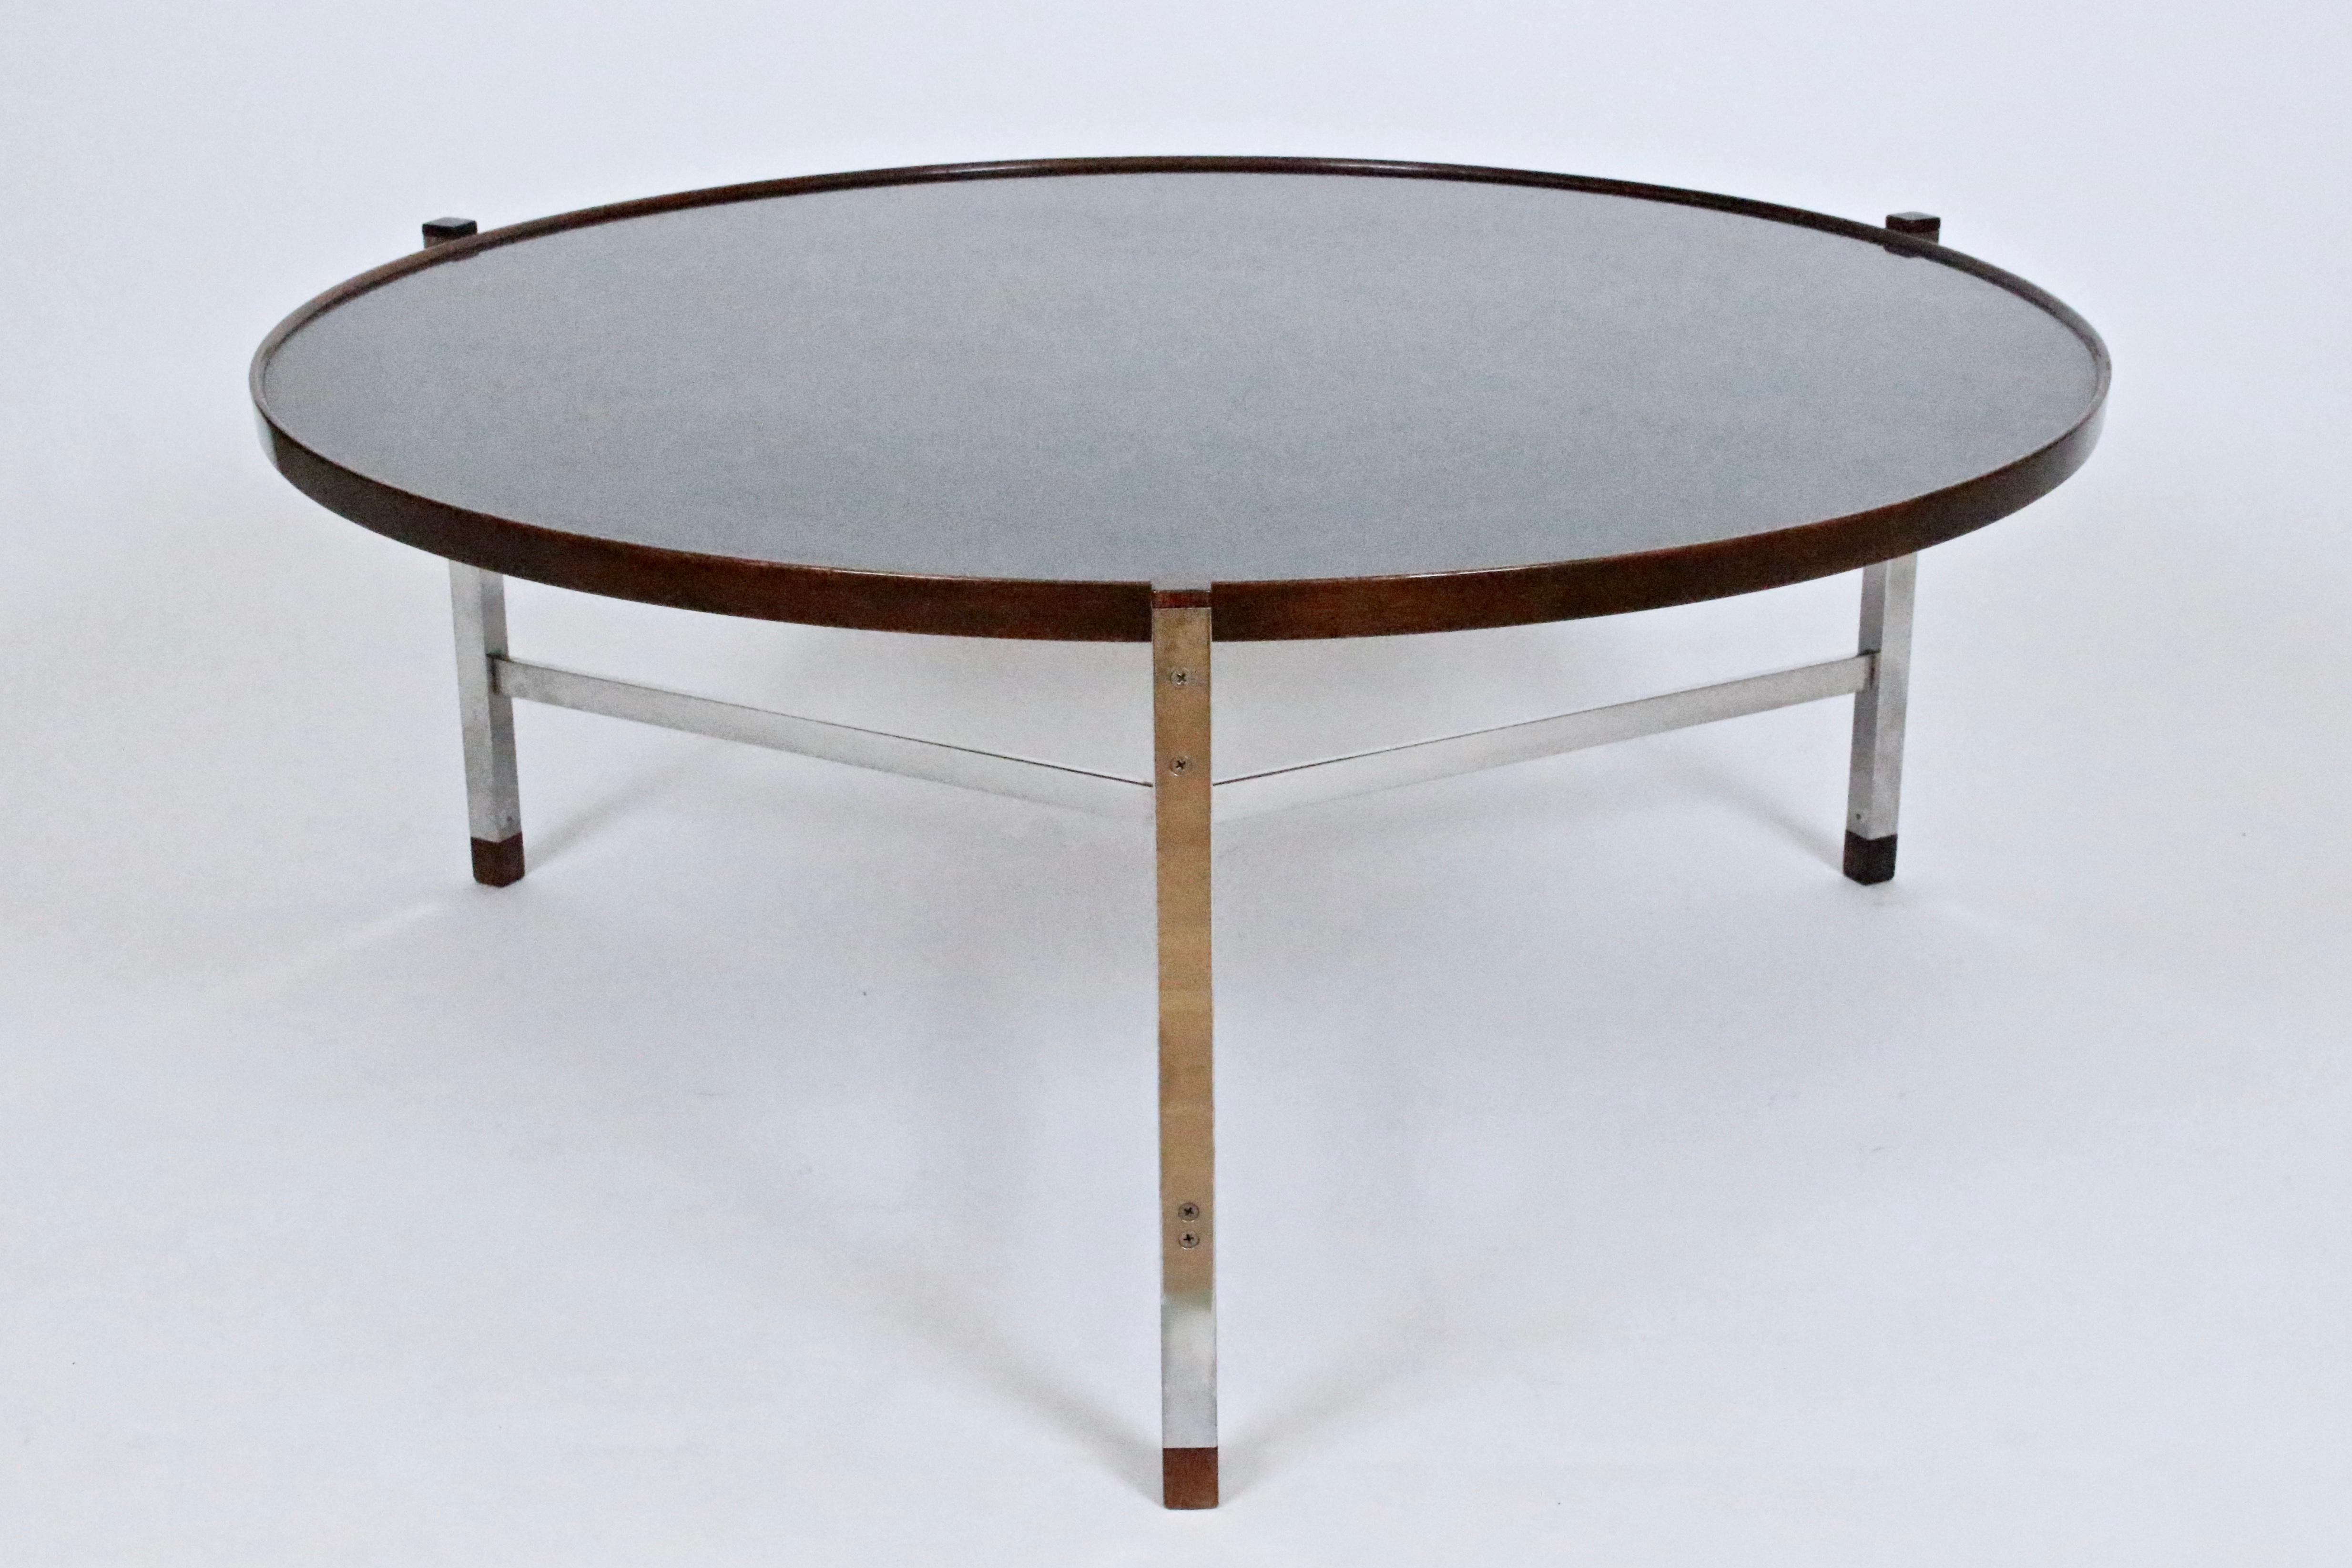 Edward Wormley for Dunbar chrome, rosewood surround and black laminate round coffee table. Featuring braced solid steel cross bars, squared chrome legs, rosewood cap and foot detail, lipped rosewood surround, inset with reflective (40D) Black